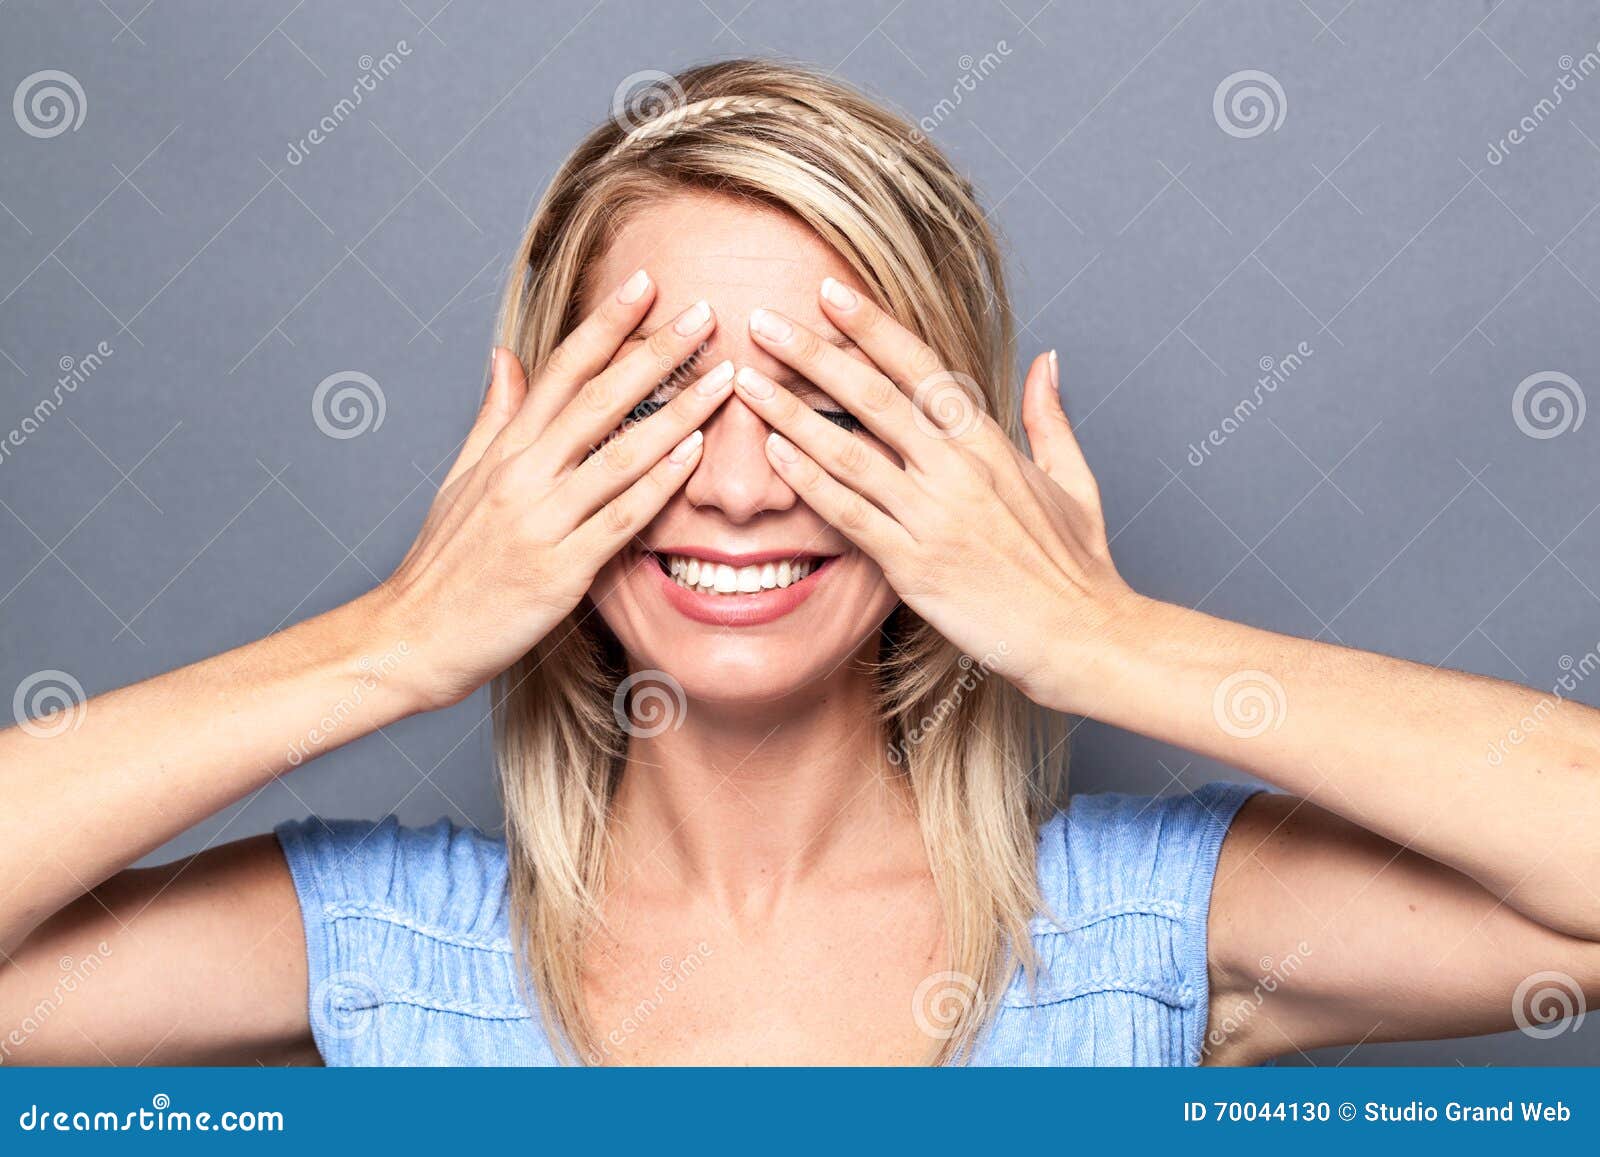 thrilled young blond woman expressing surprise